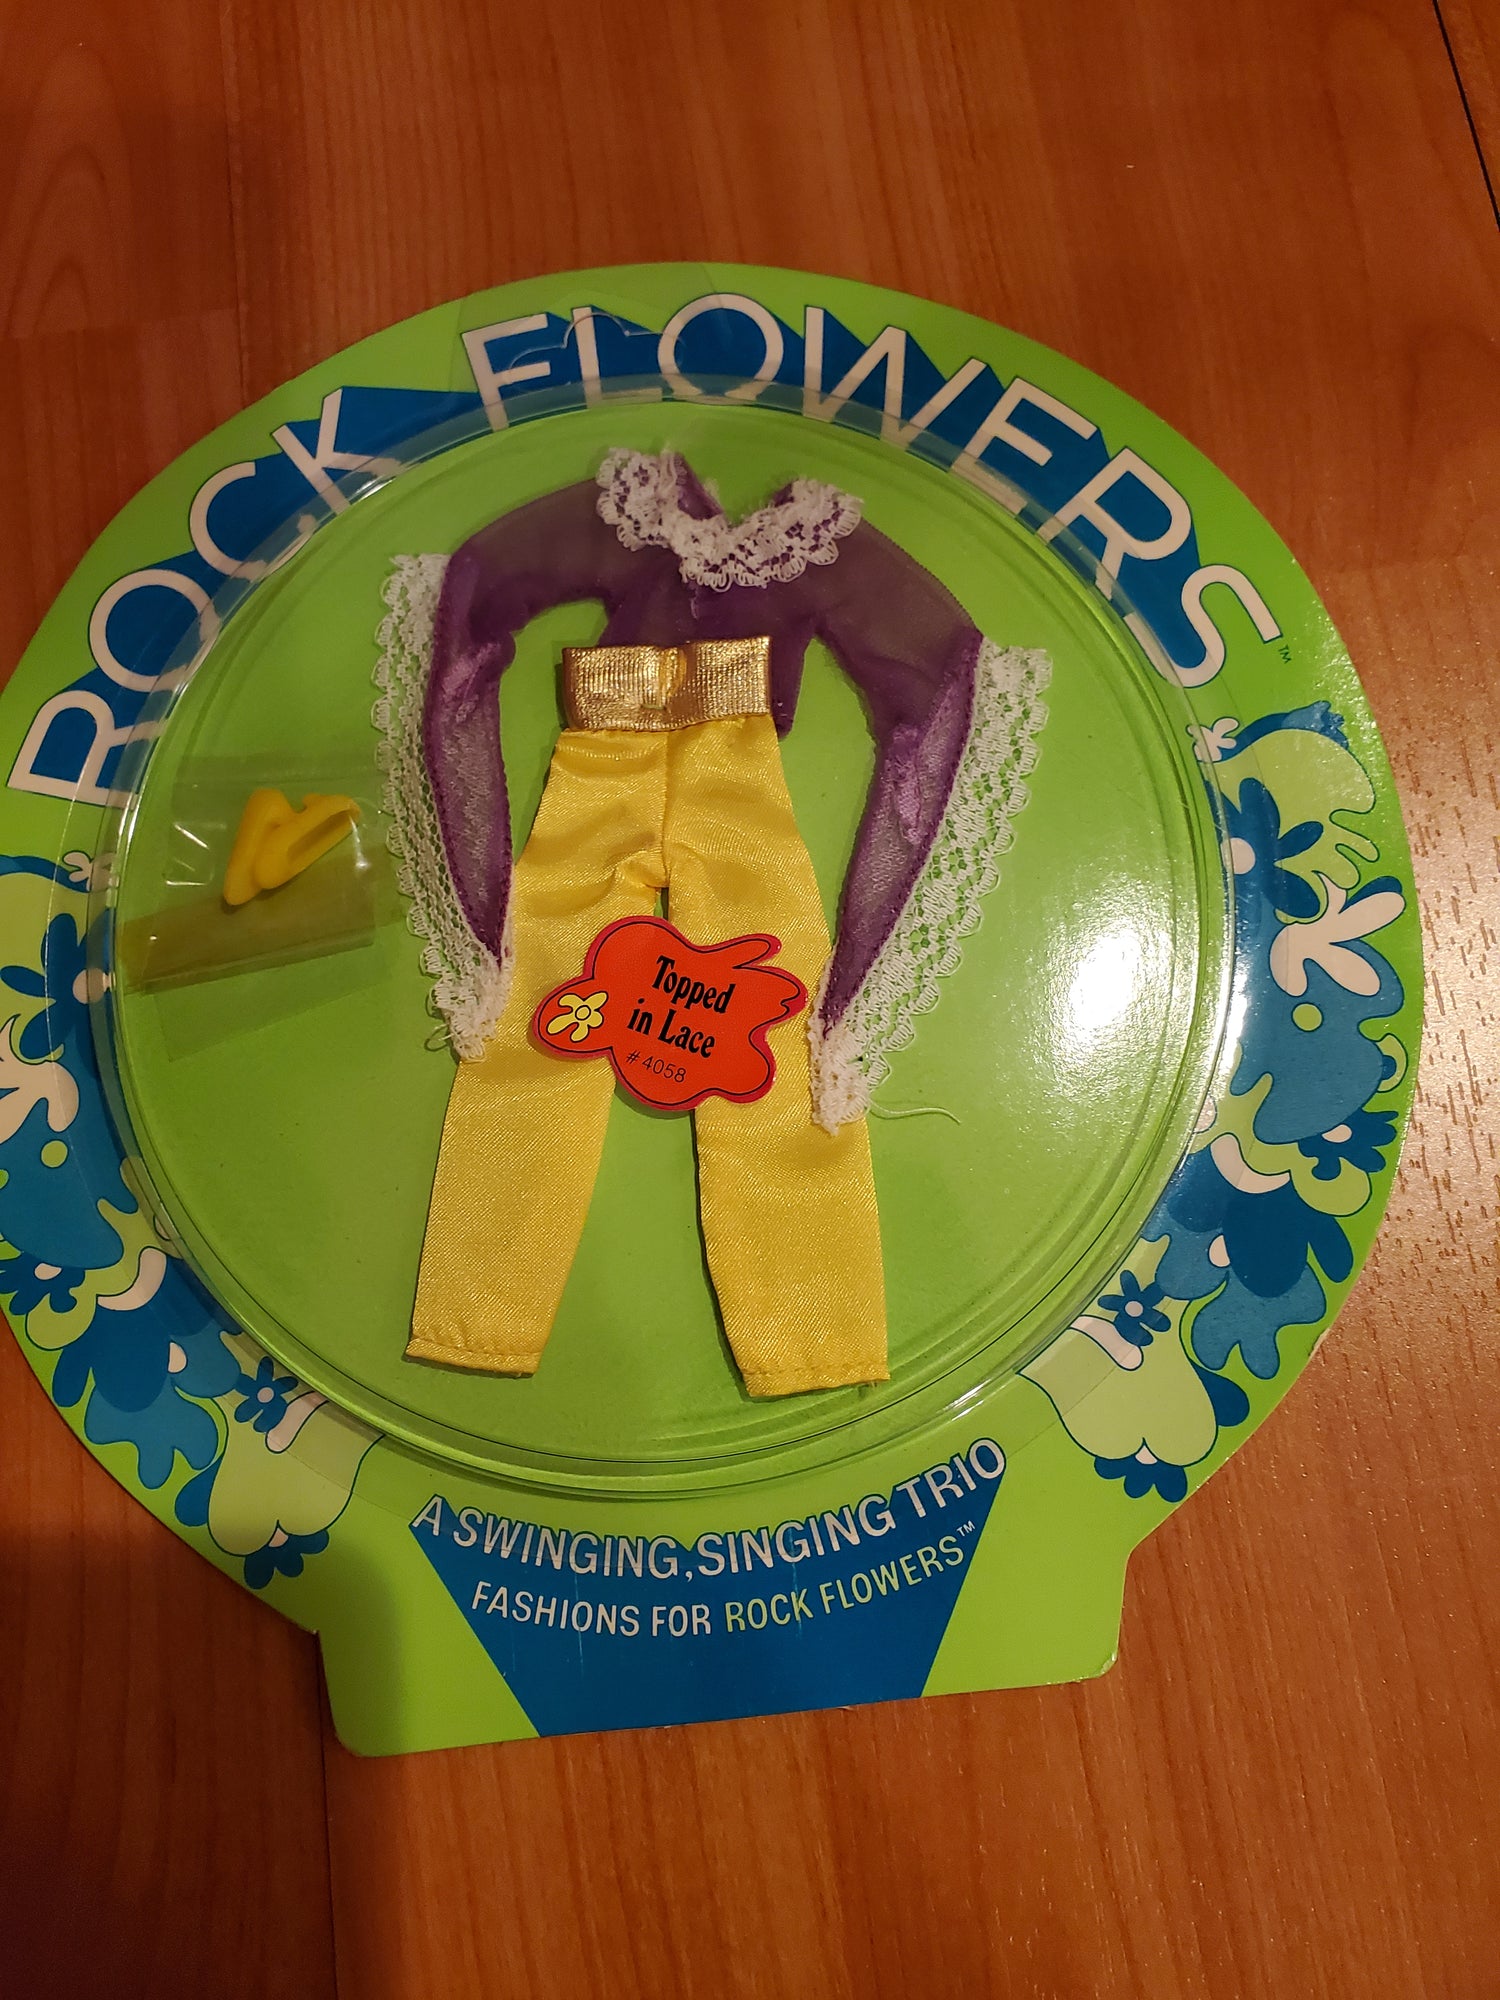 All Other Rockflowers